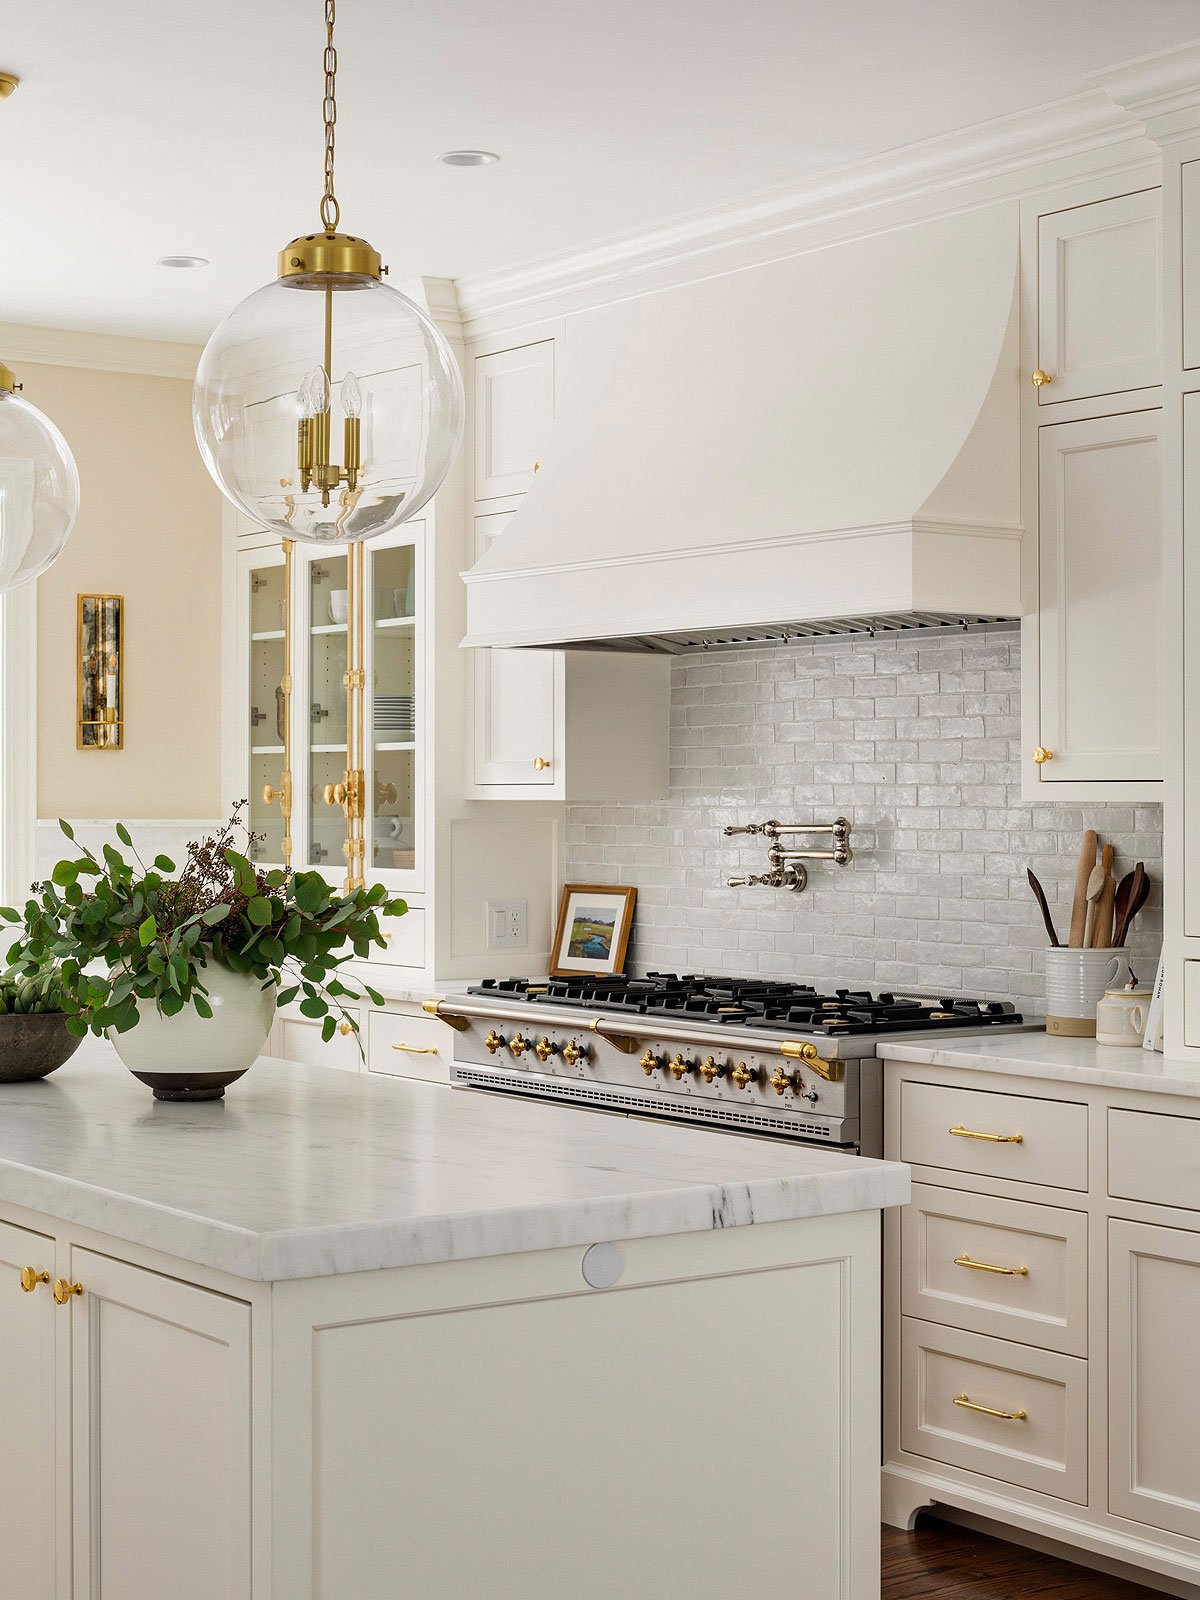 White Kitchen Cabinets With Brushed Gold Hardware - Tutorial Pics